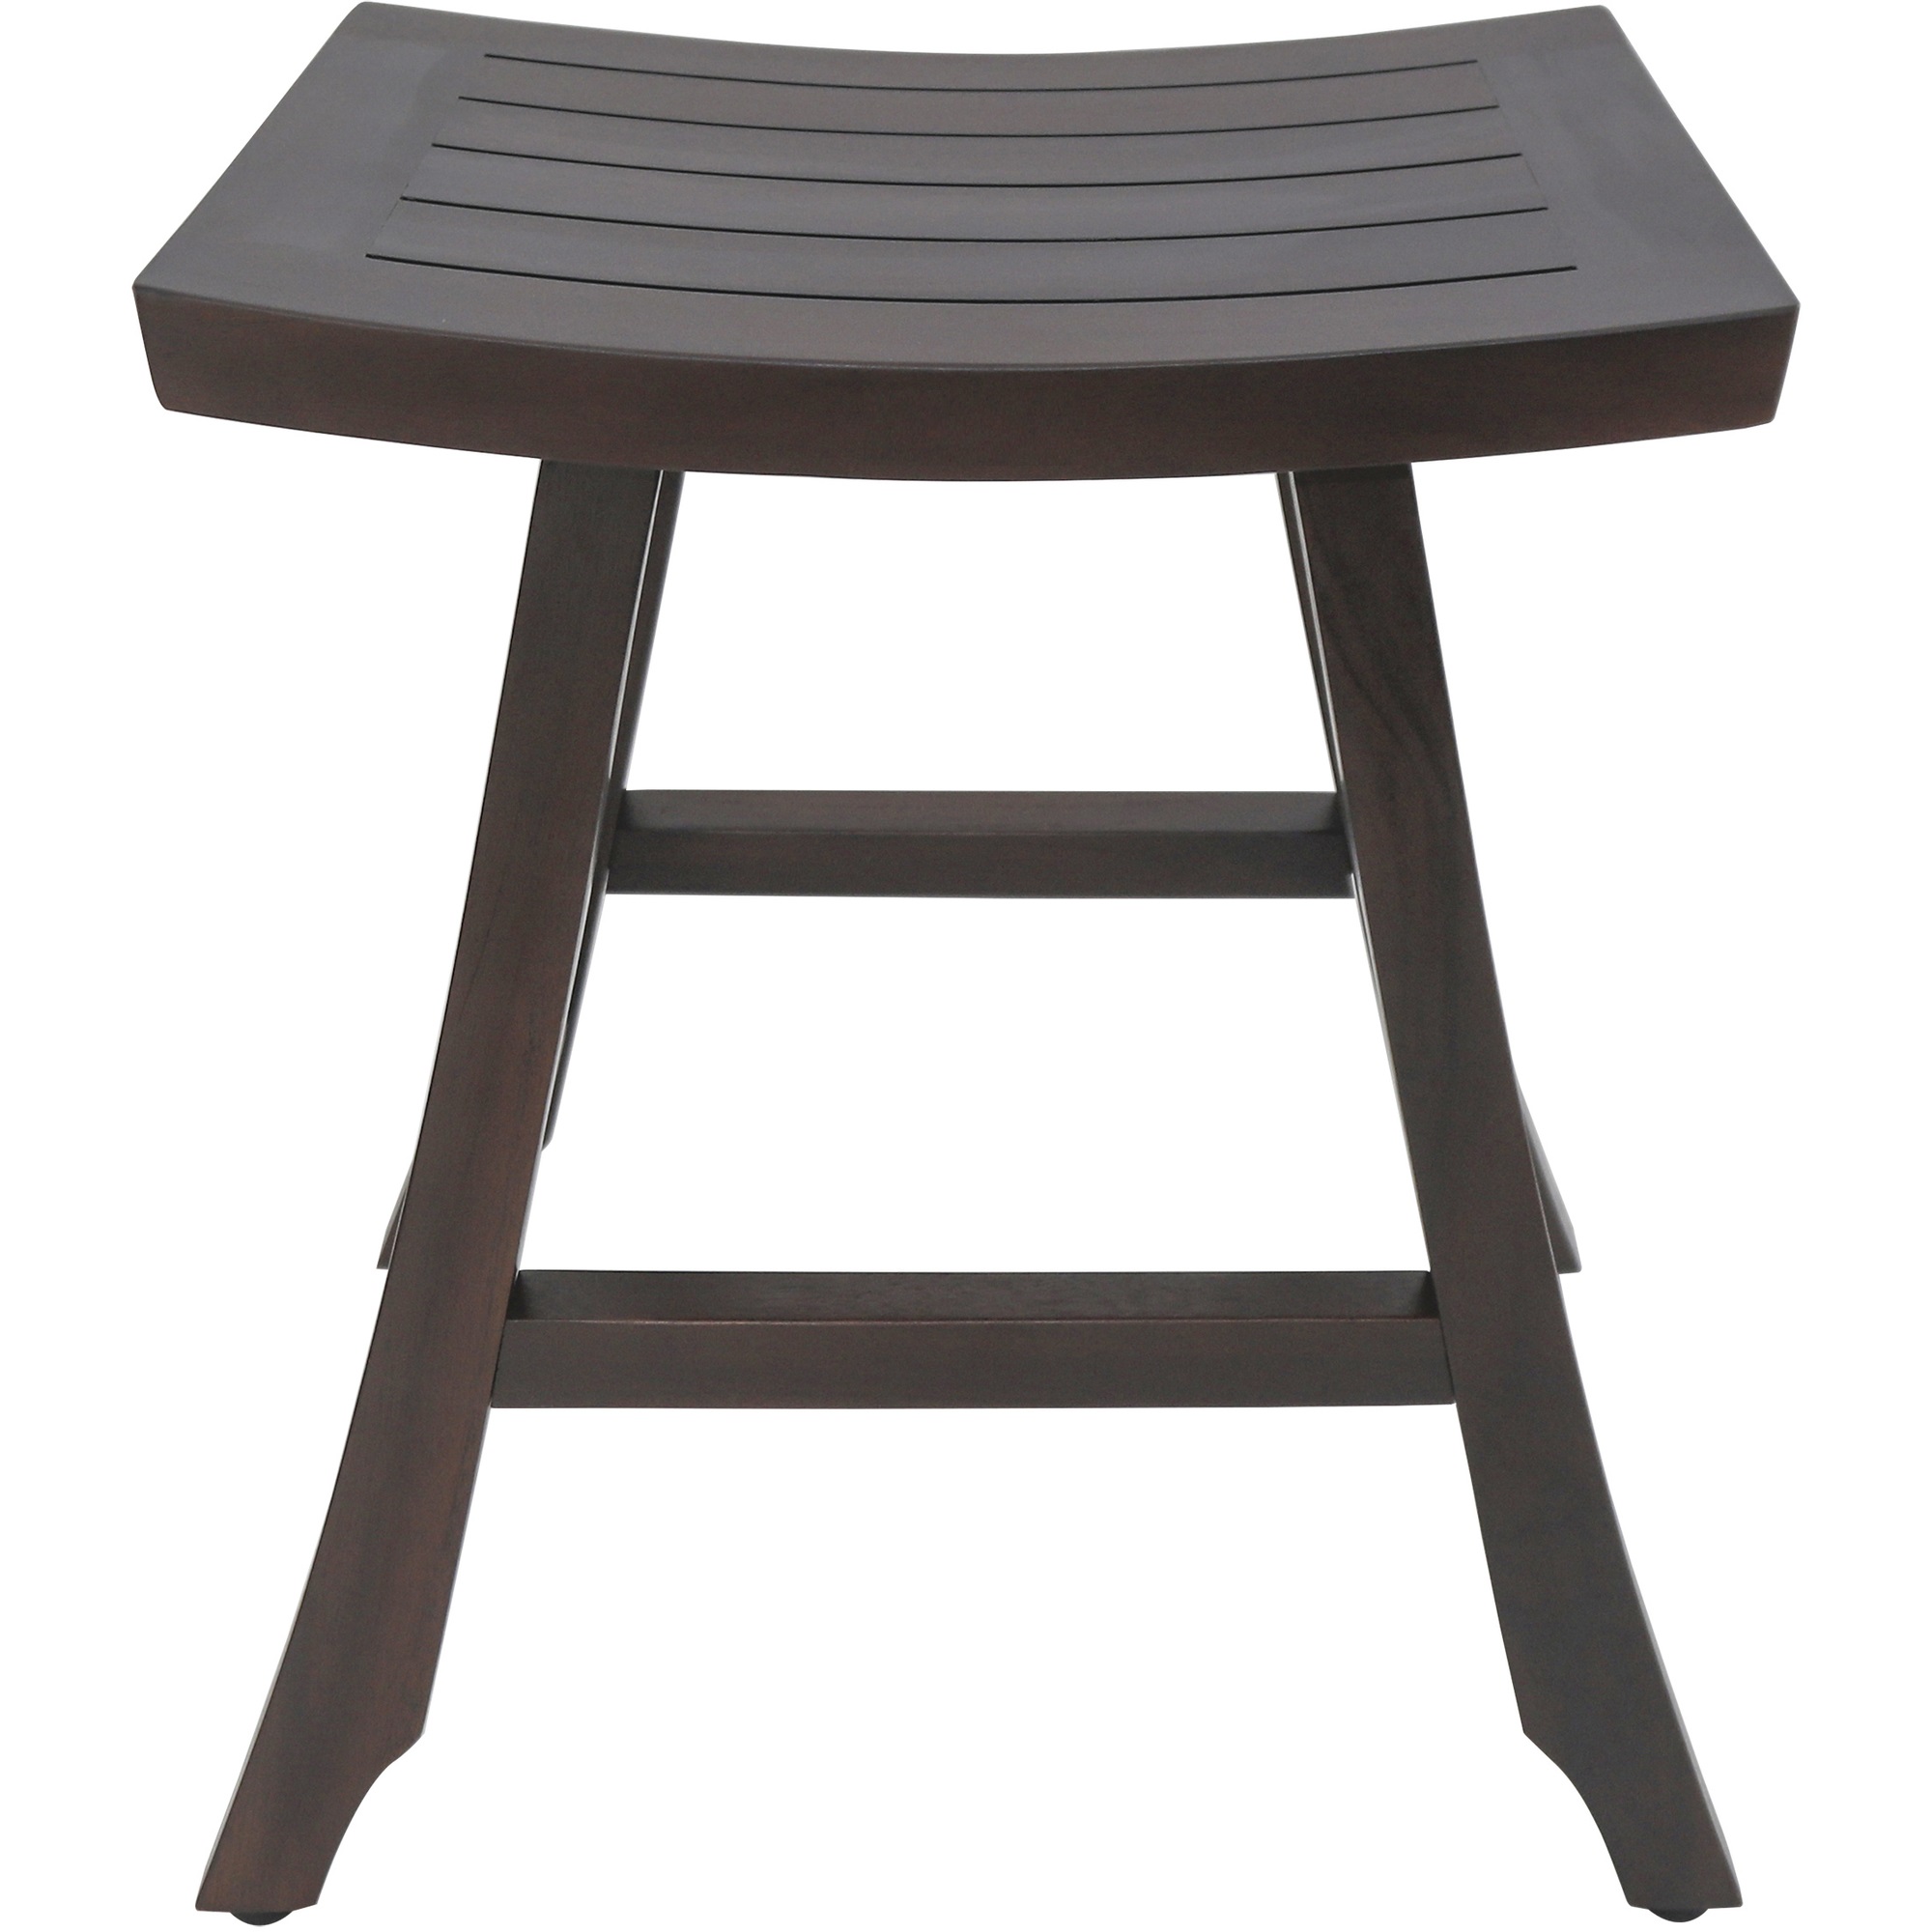 Contemporary Teak Shower Stool with Shelf in Brown Finish